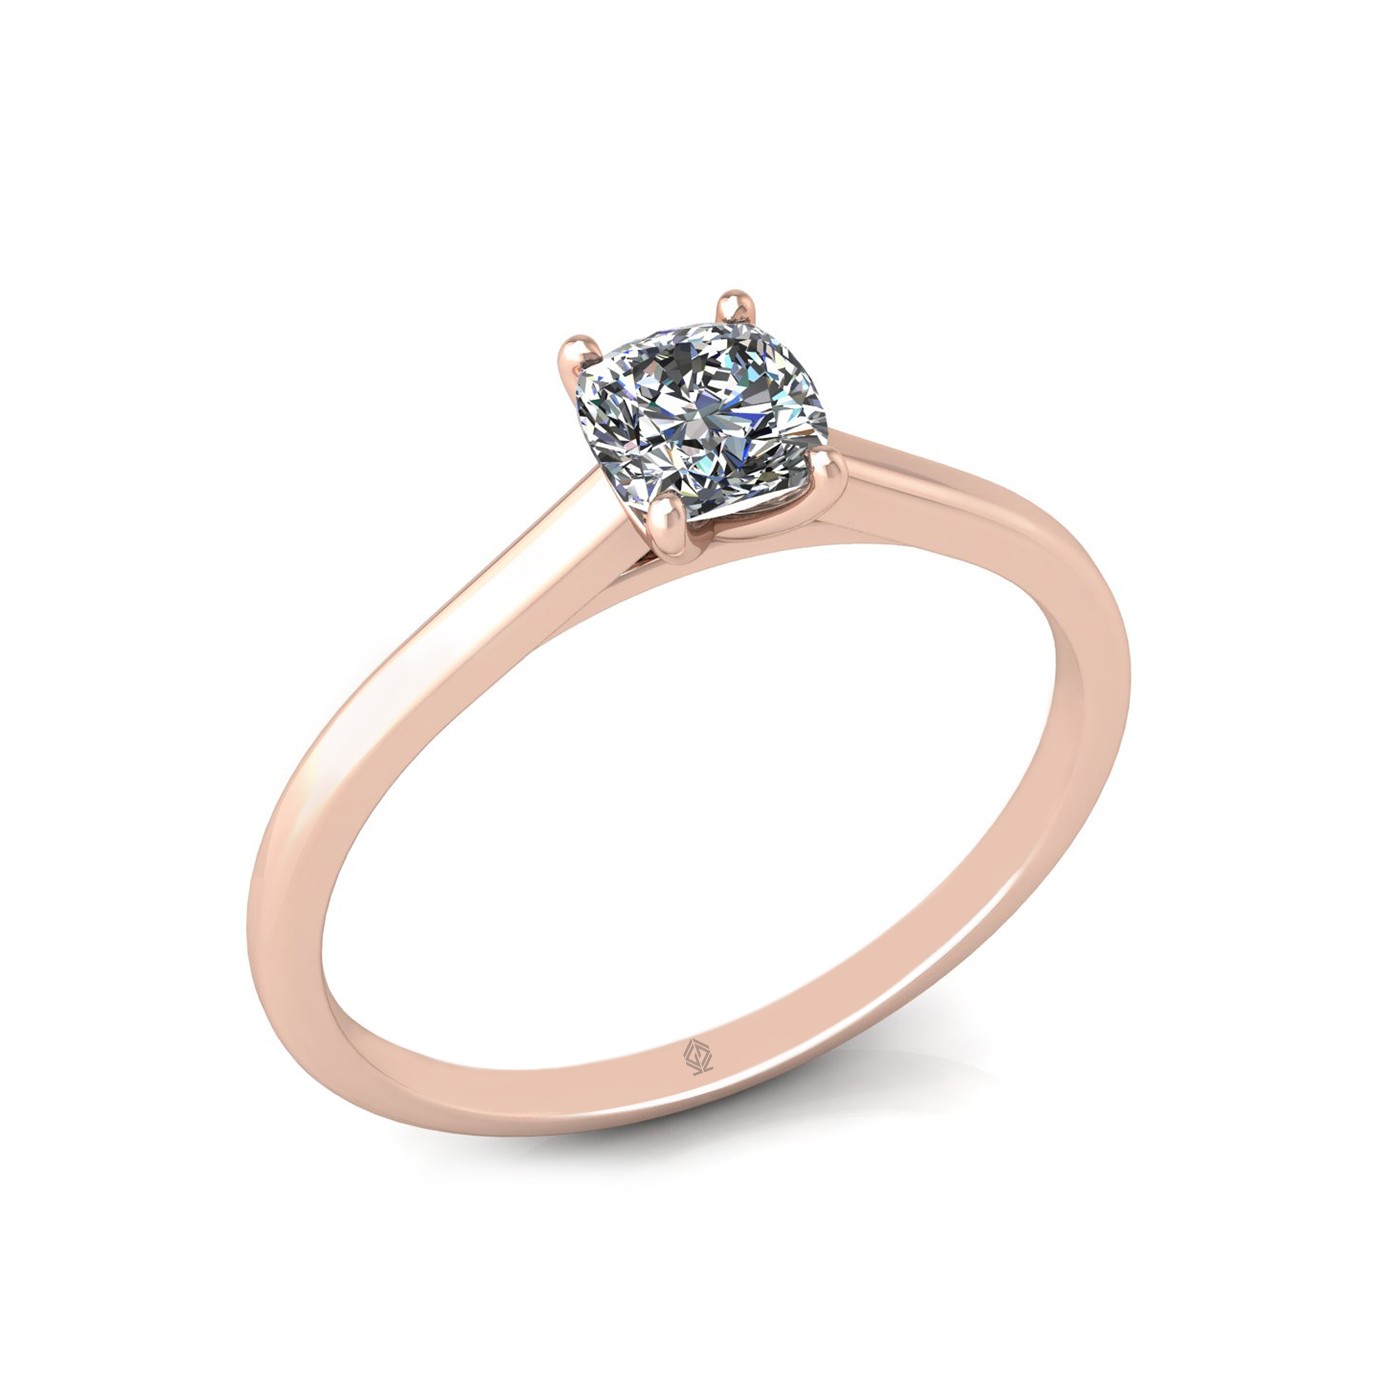 18k rose gold  0,30 ct 4 prongs solitaire cushion cut diamond engagement ring with whisper thin band